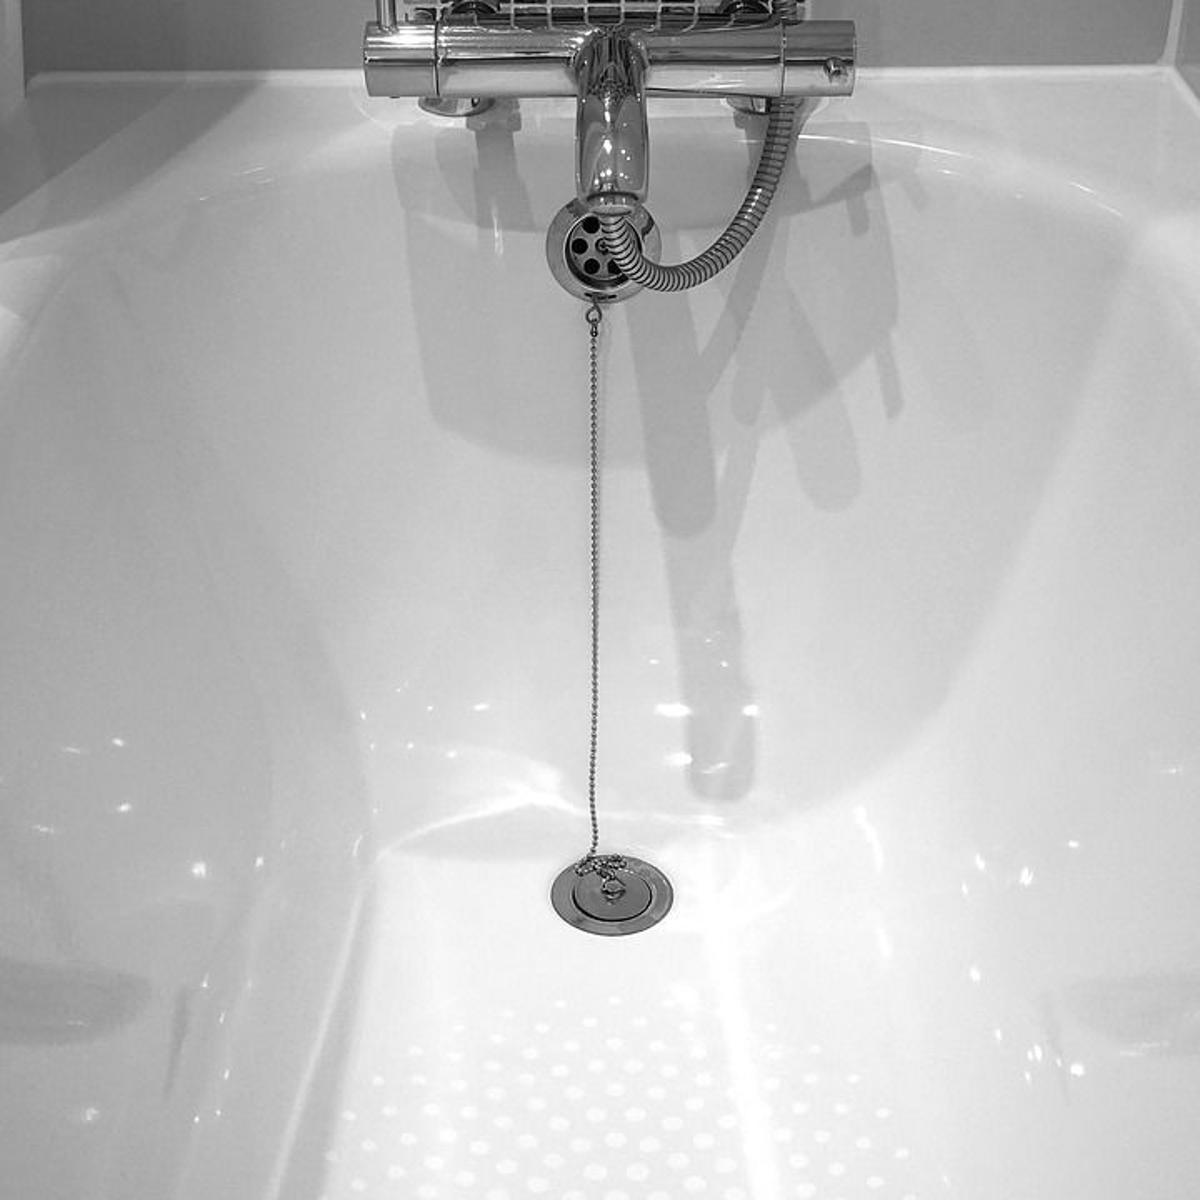 3 Caulking Secrets From The Pros Home, What Do You Use To Remove Old Caulk From A Bathtub